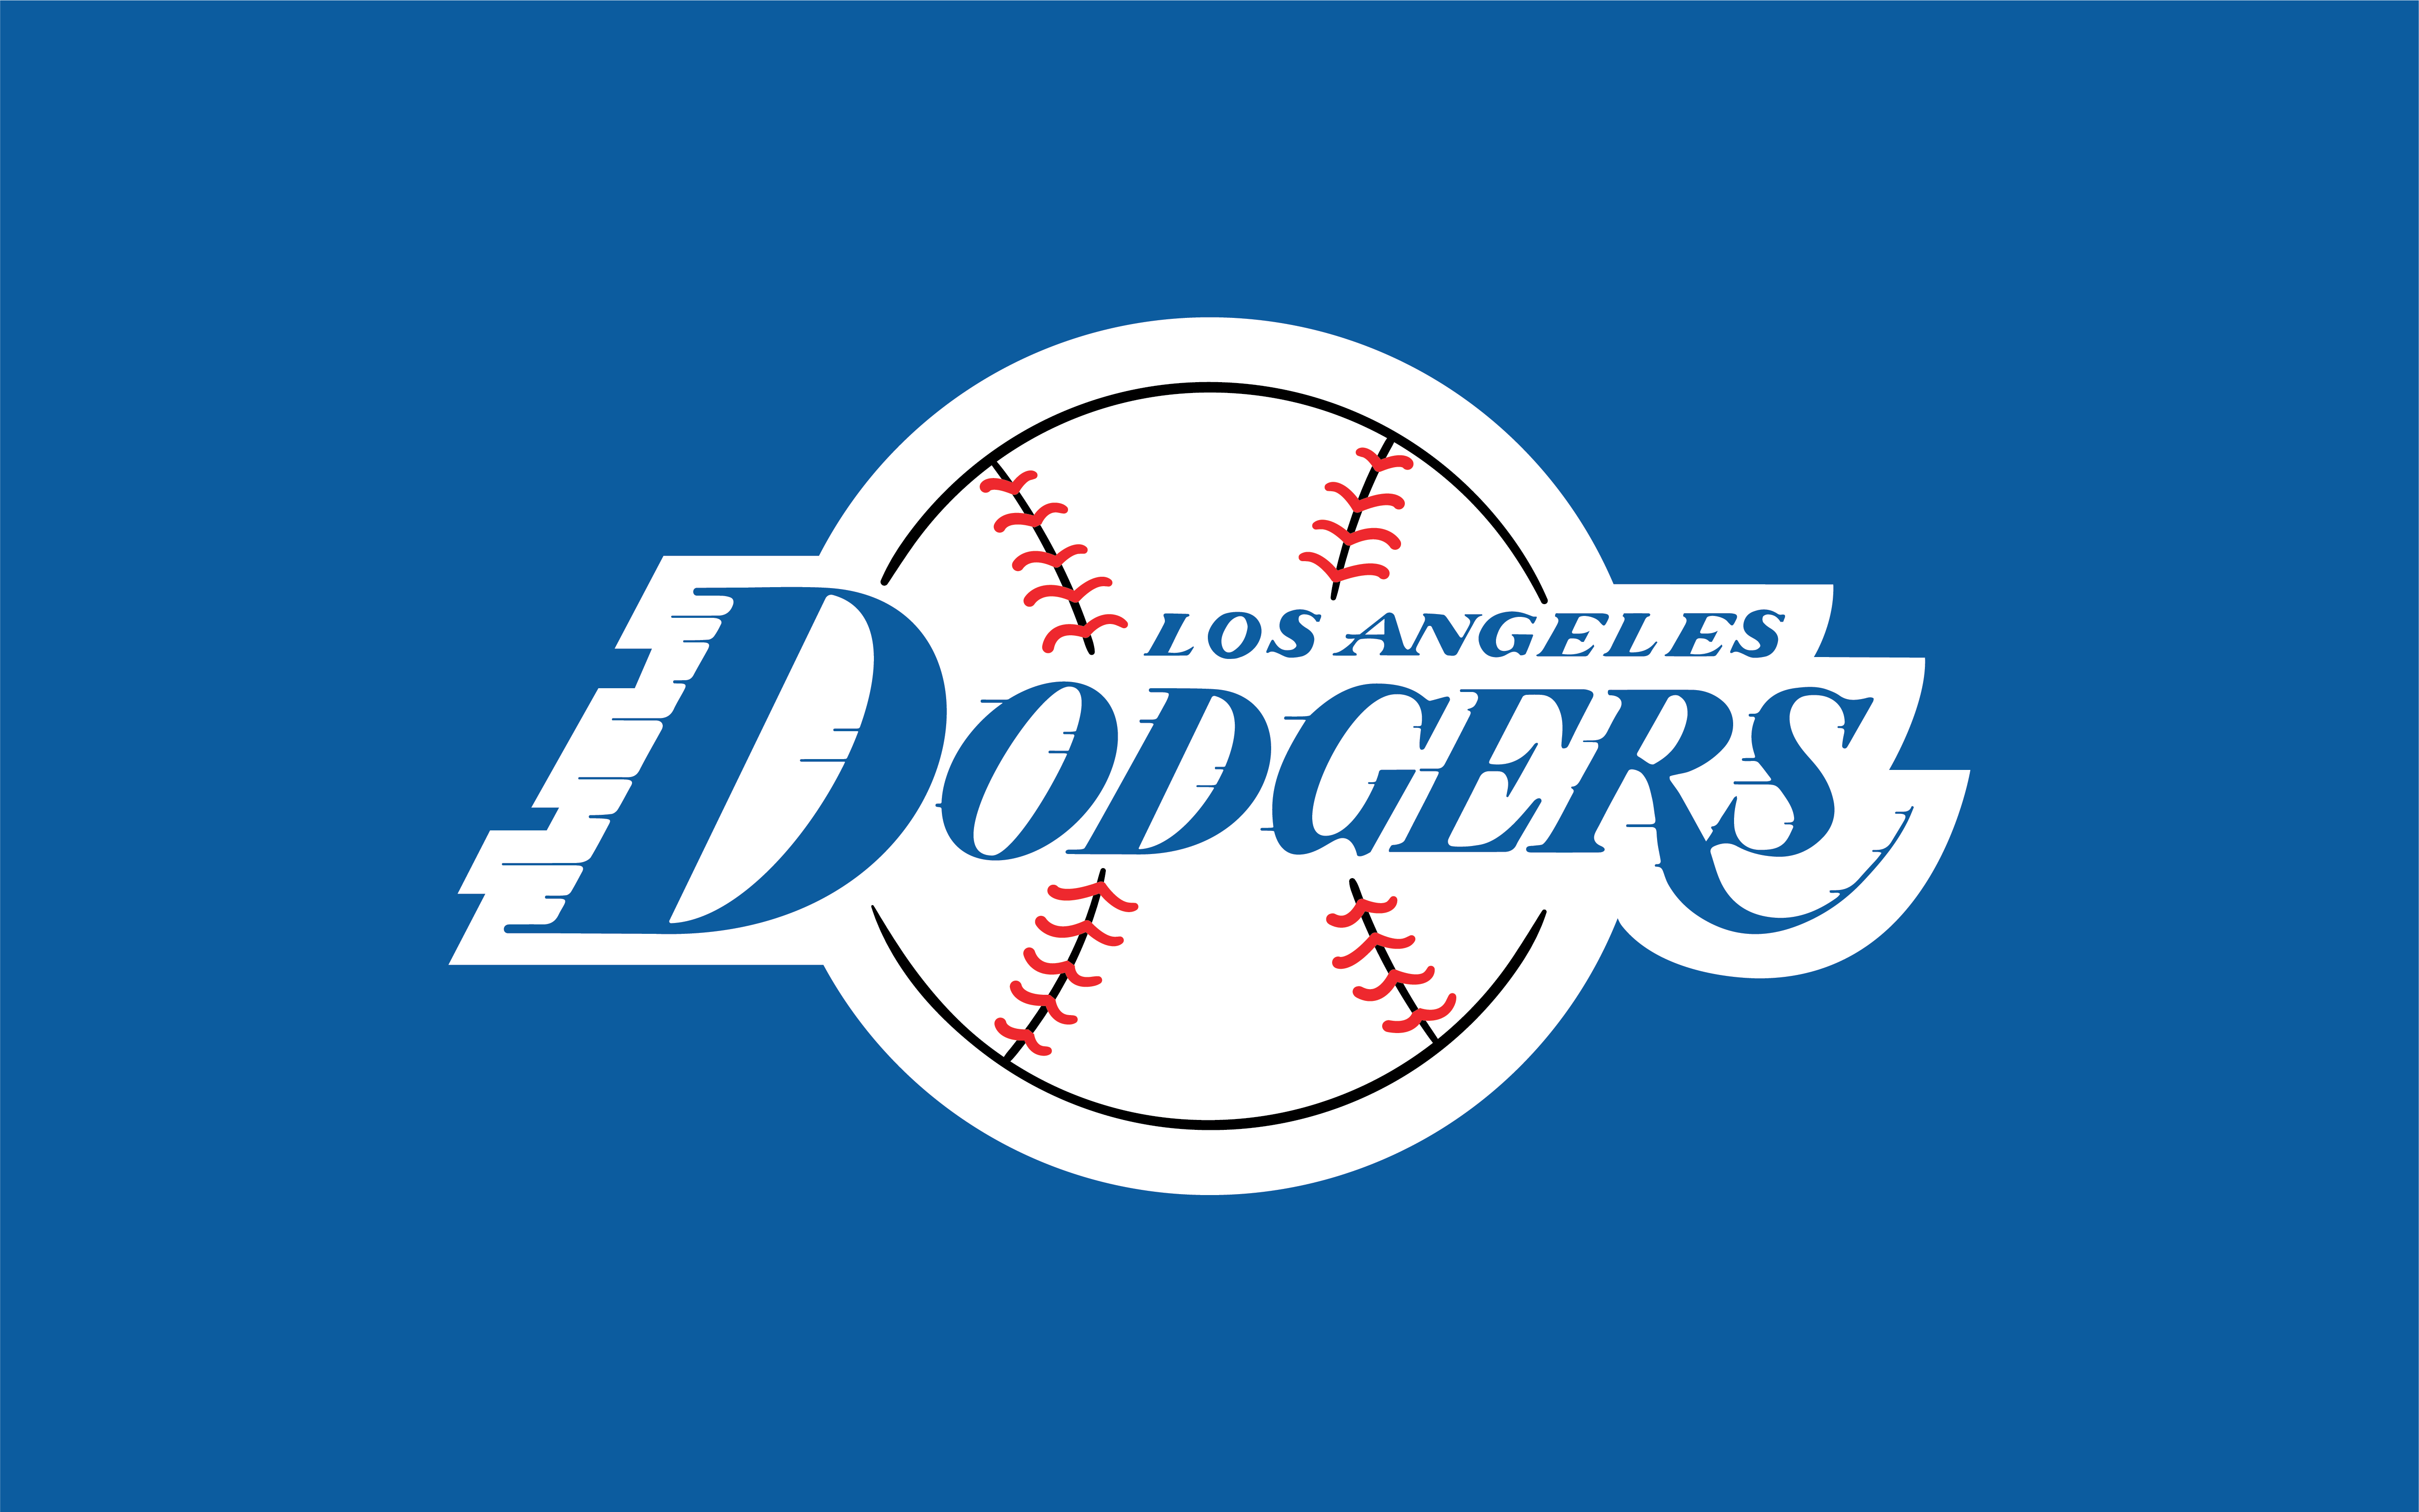 Los Angeles Dodgers Logo - I made Los Angeles Dodgers in the style of the Lakers logo : Dodgers